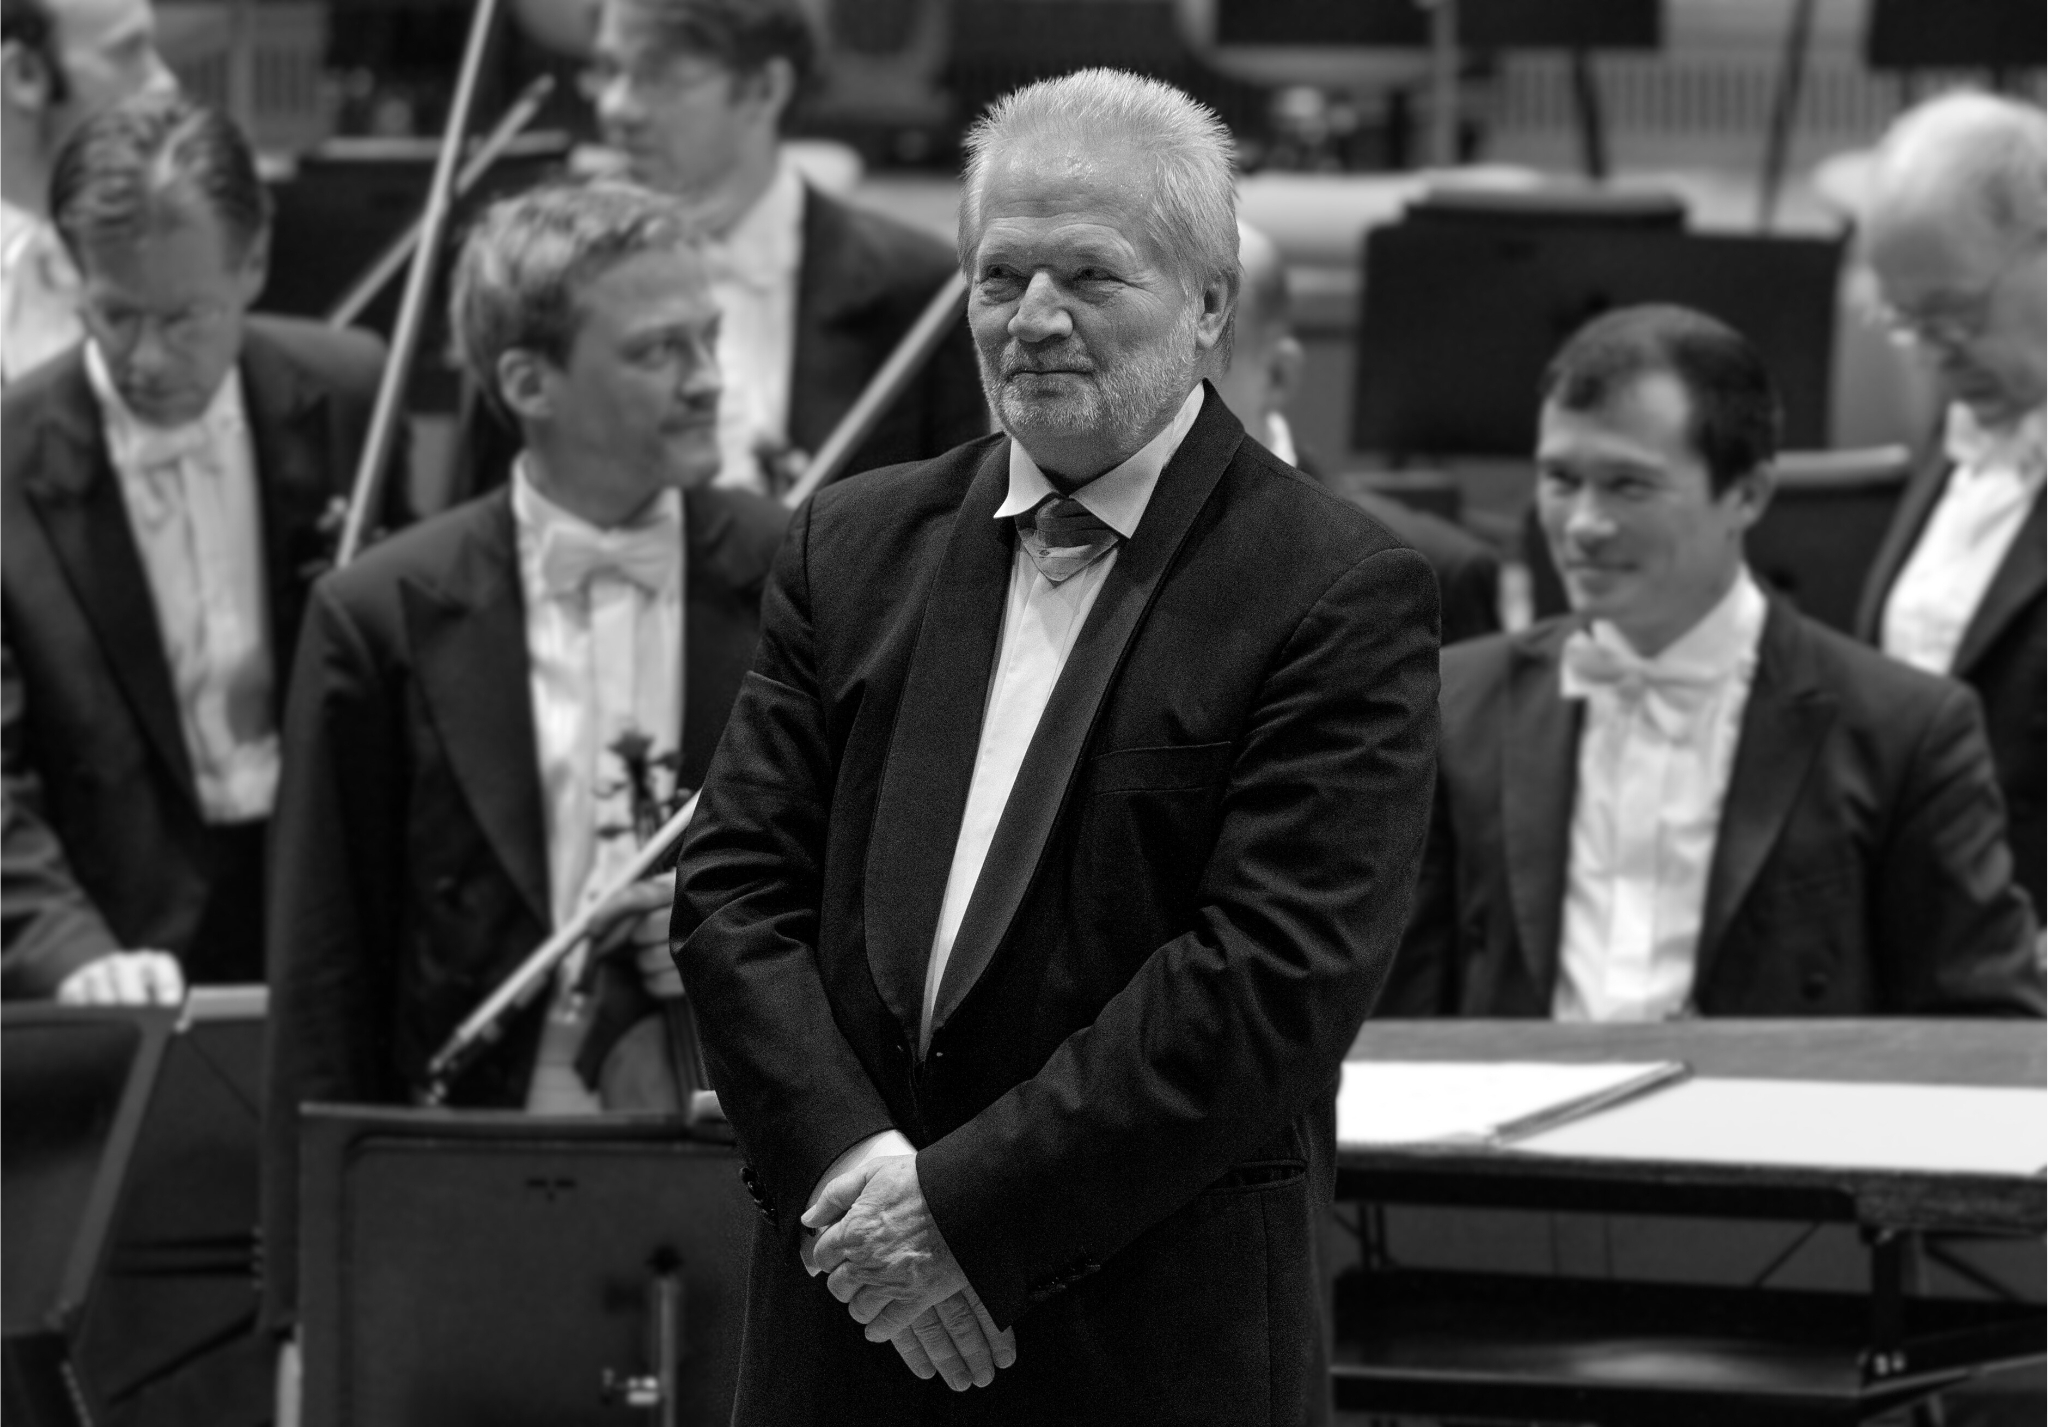 Peter Eötvös in front of the orchestra, black and white photo